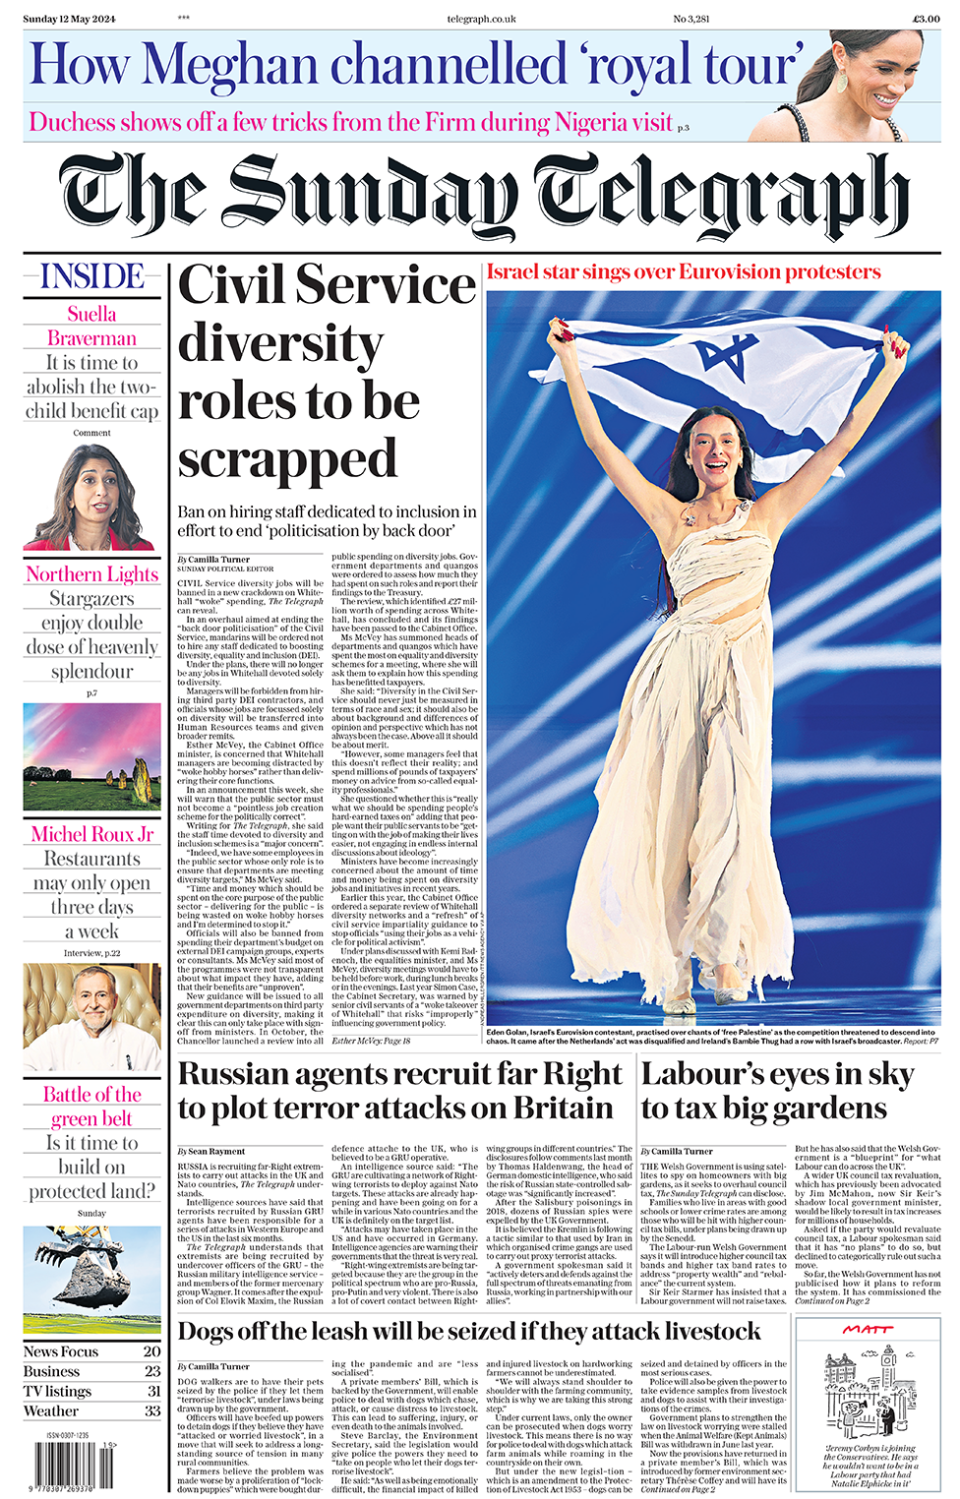 Sunday Telegraph front page